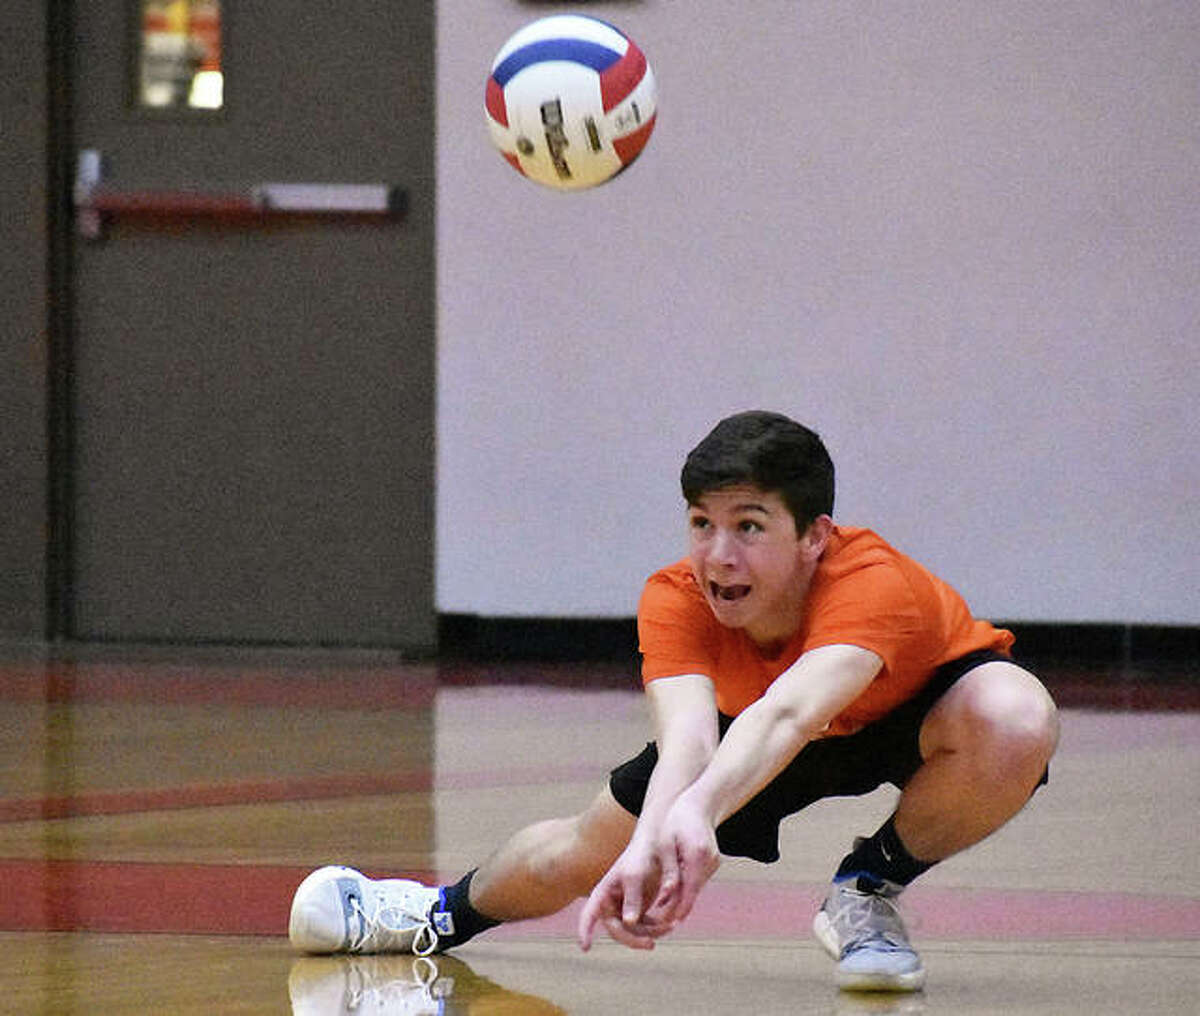 Edwardsville libero Henry Hupp successfully makes a dig during the second game against Belleville East.